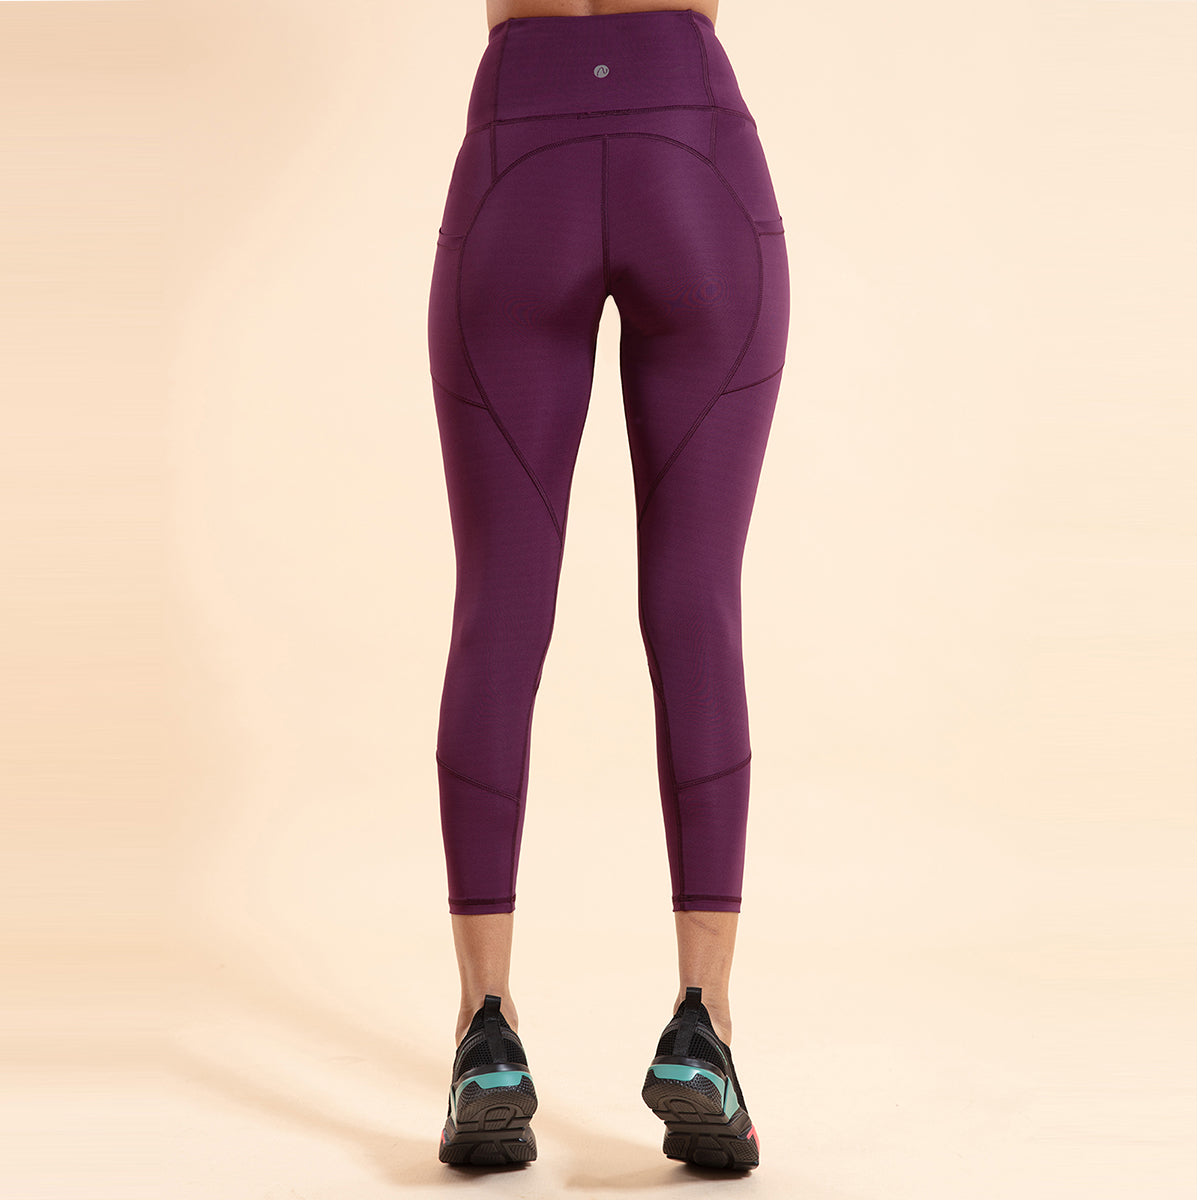 Nykd All Day High rise Classic Pannelled Leggings-NYK100 Potent purple + Pink yarrow